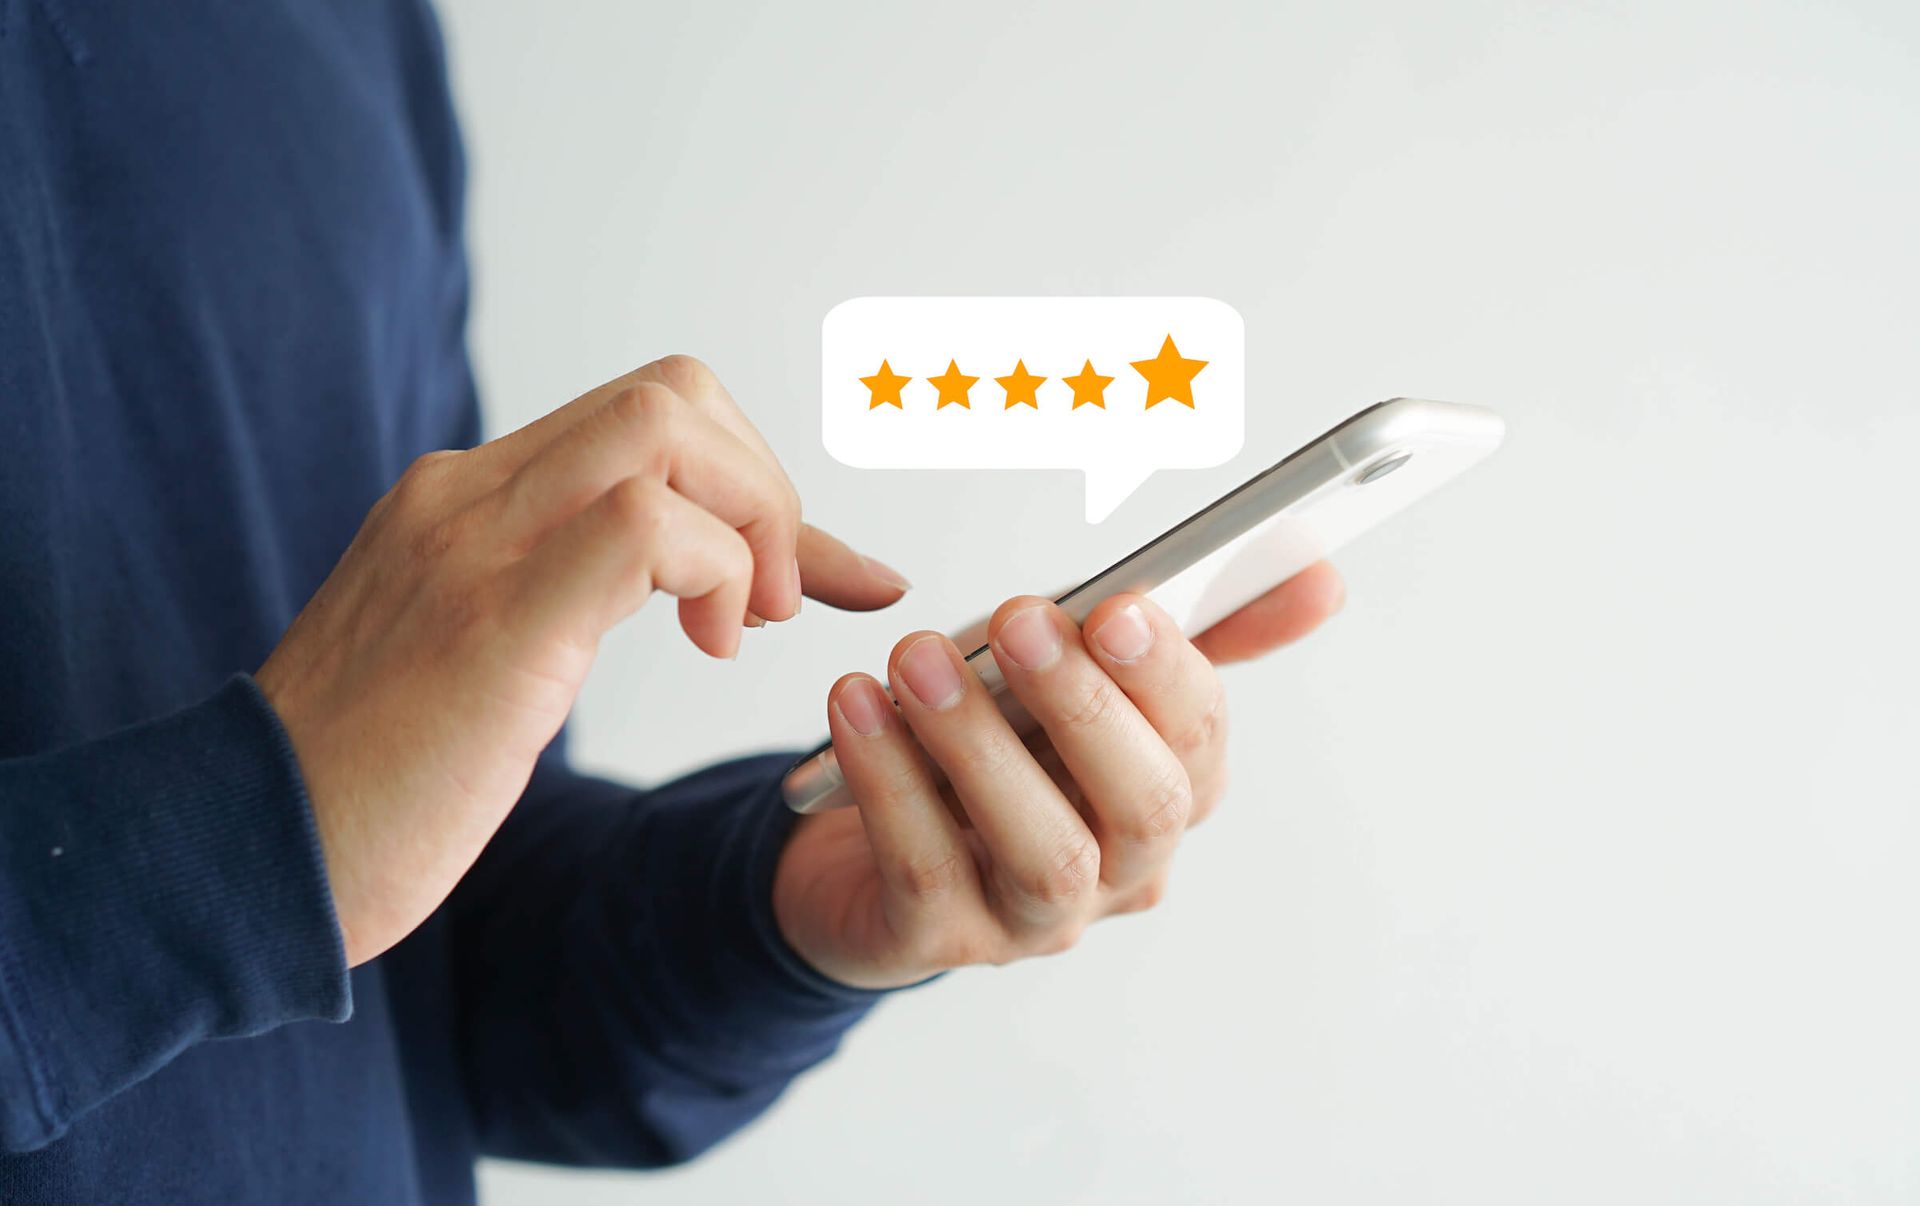 How customer reviews have shaped buying habits over time